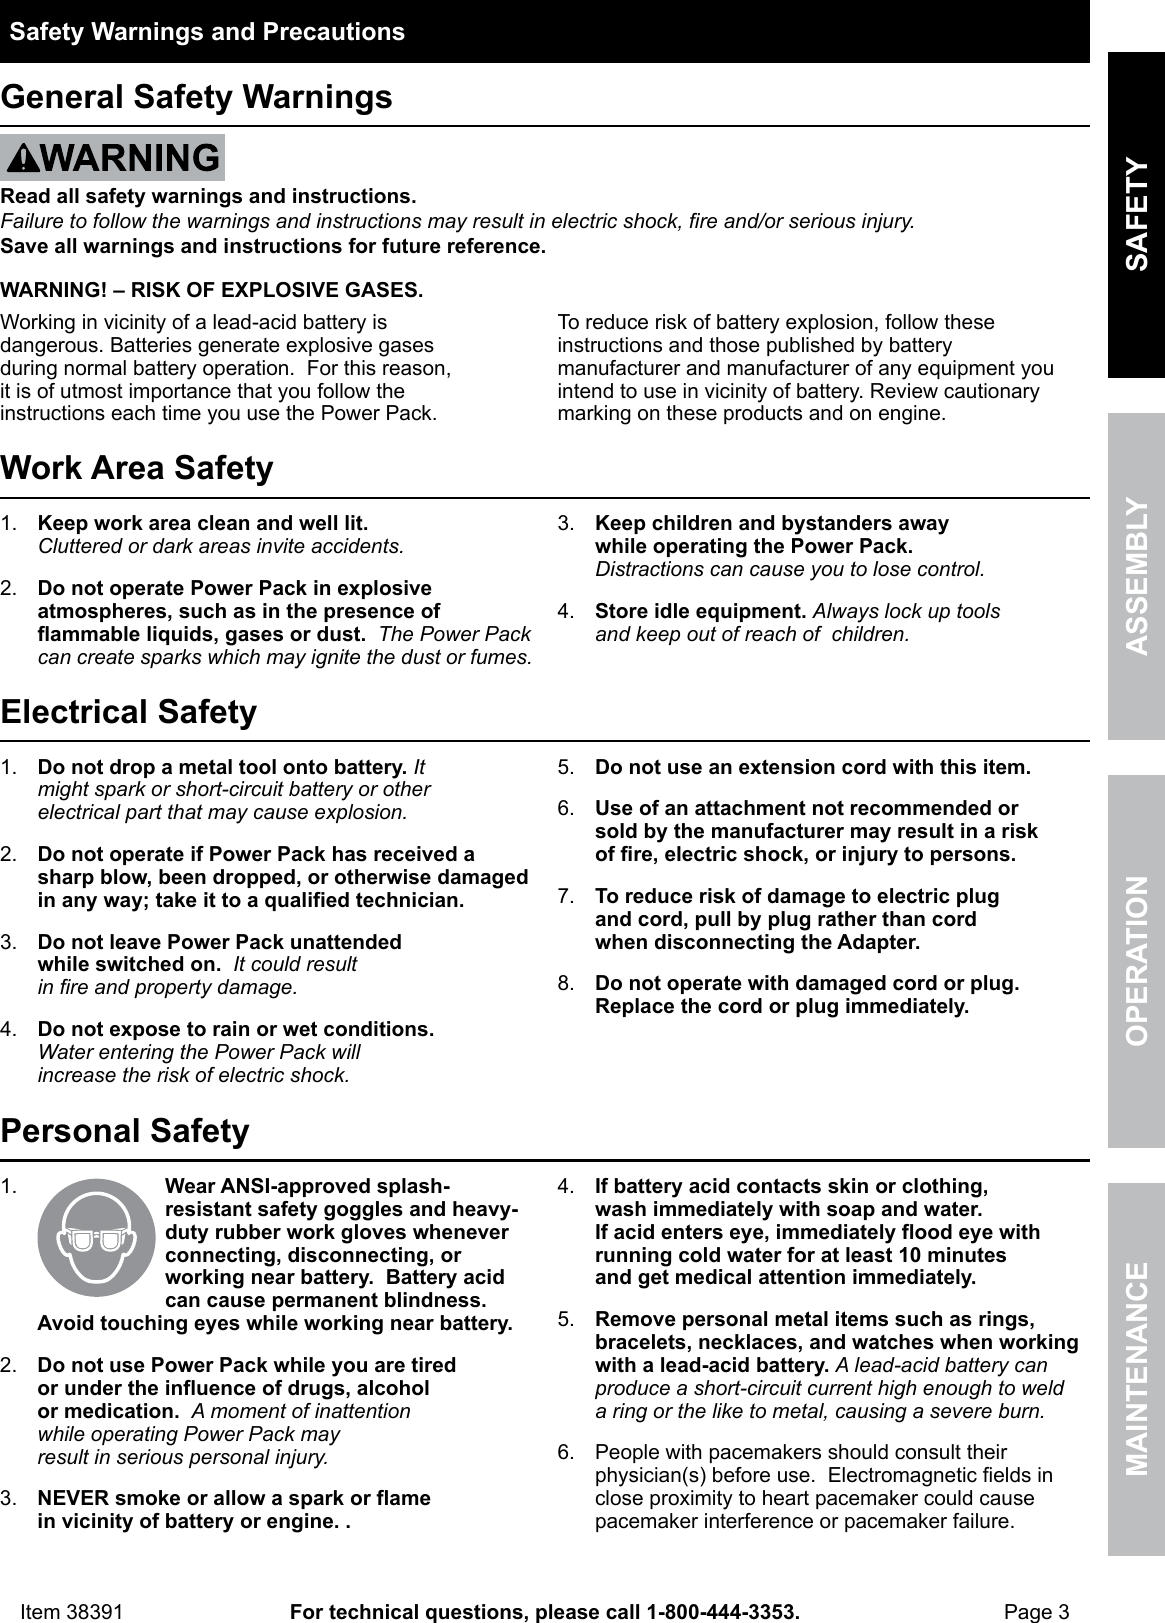 Page 3 of 12 - Harbor-Freight Harbor-Freight-3-In-1-Jump-Starter-And-Power-Supply-Product-Manual-  Harbor-freight-3-in-1-jump-starter-and-power-supply-product-manual